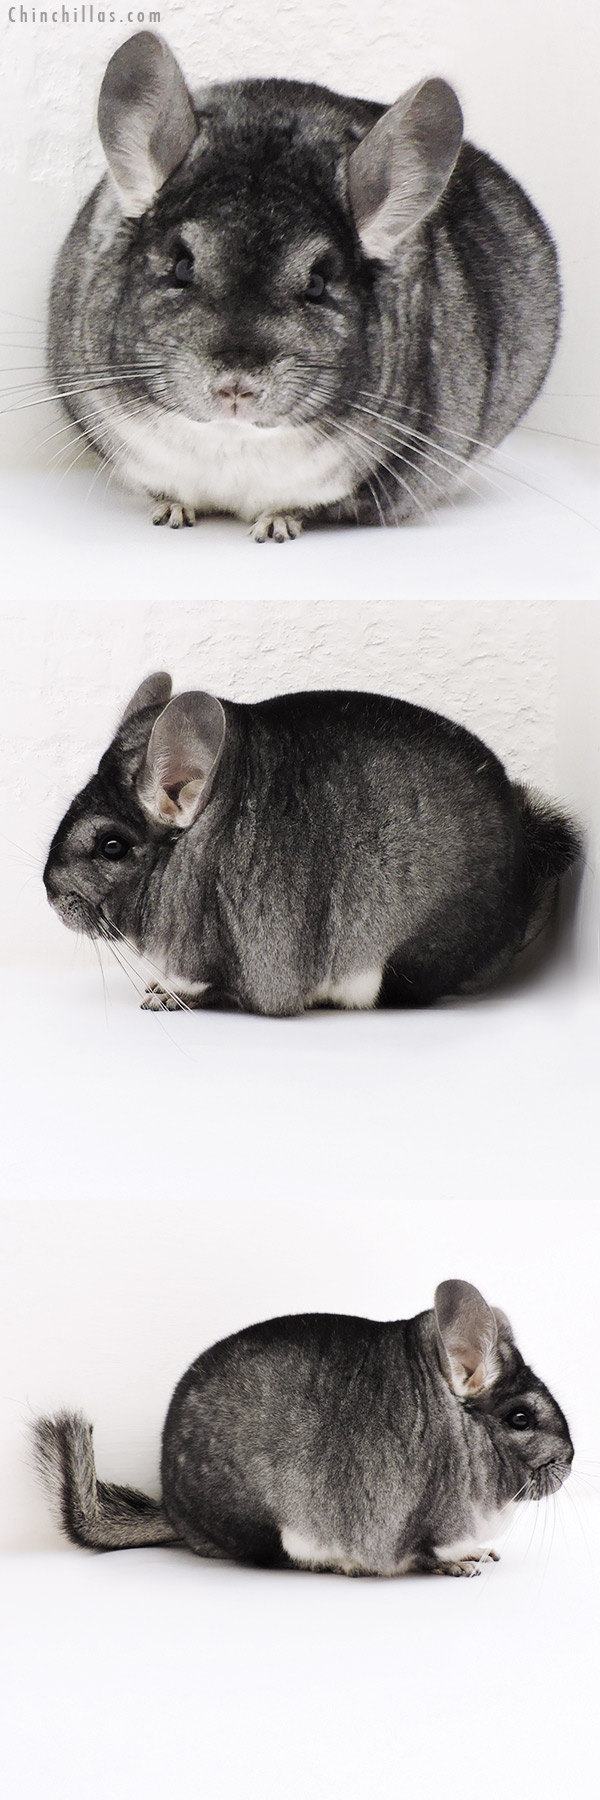 Chinchilla or related item offered for sale or export on Chinchillas.com - 17125 Blocky Premium Production Quality Standard Female Chinchilla